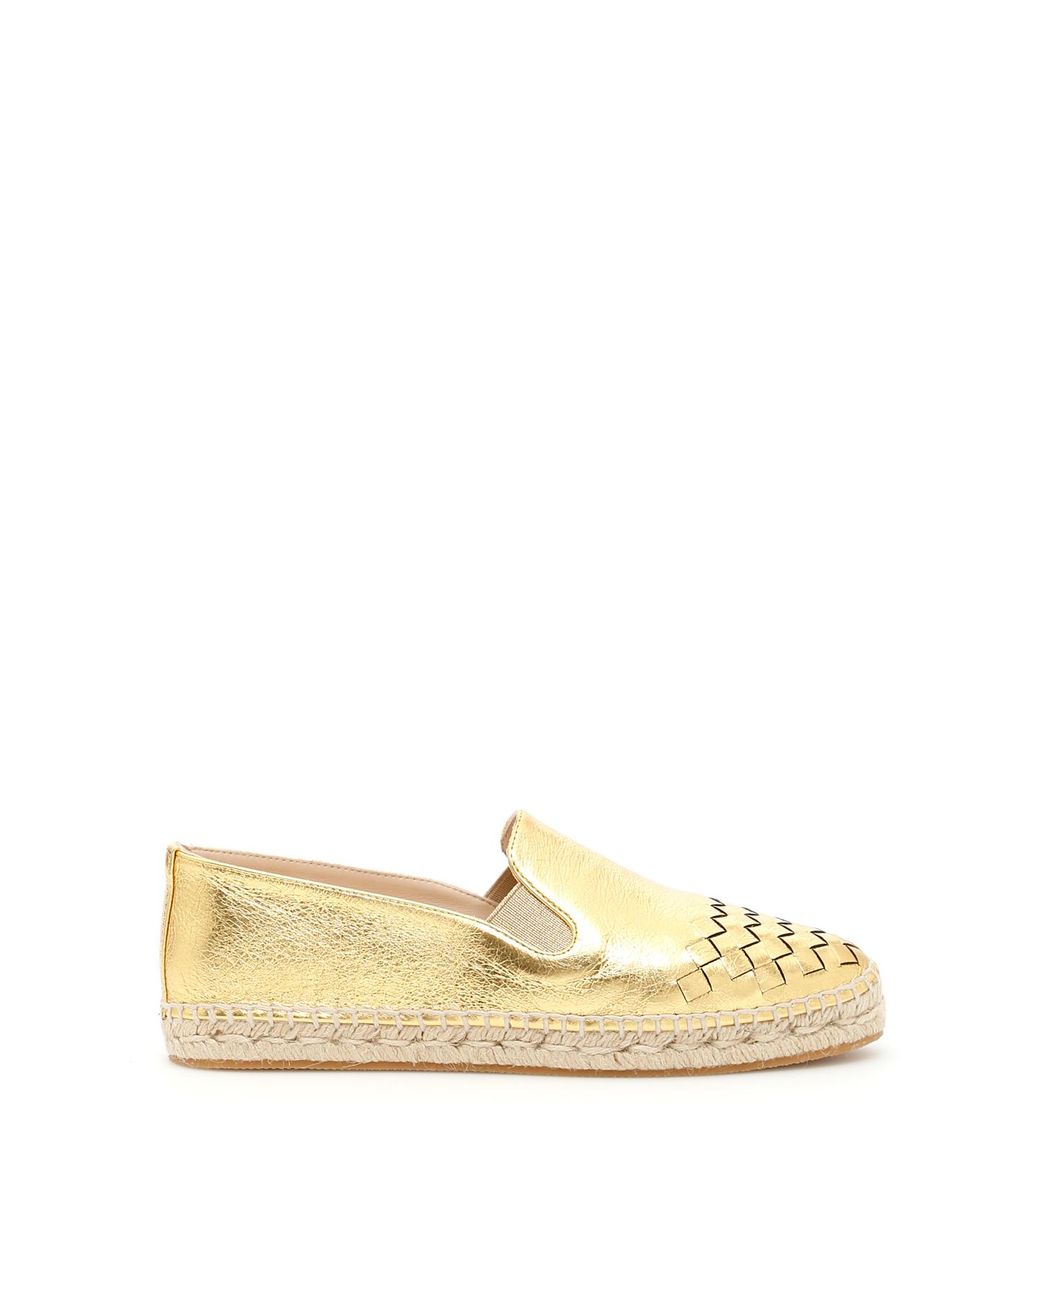 woven leather espadrilles